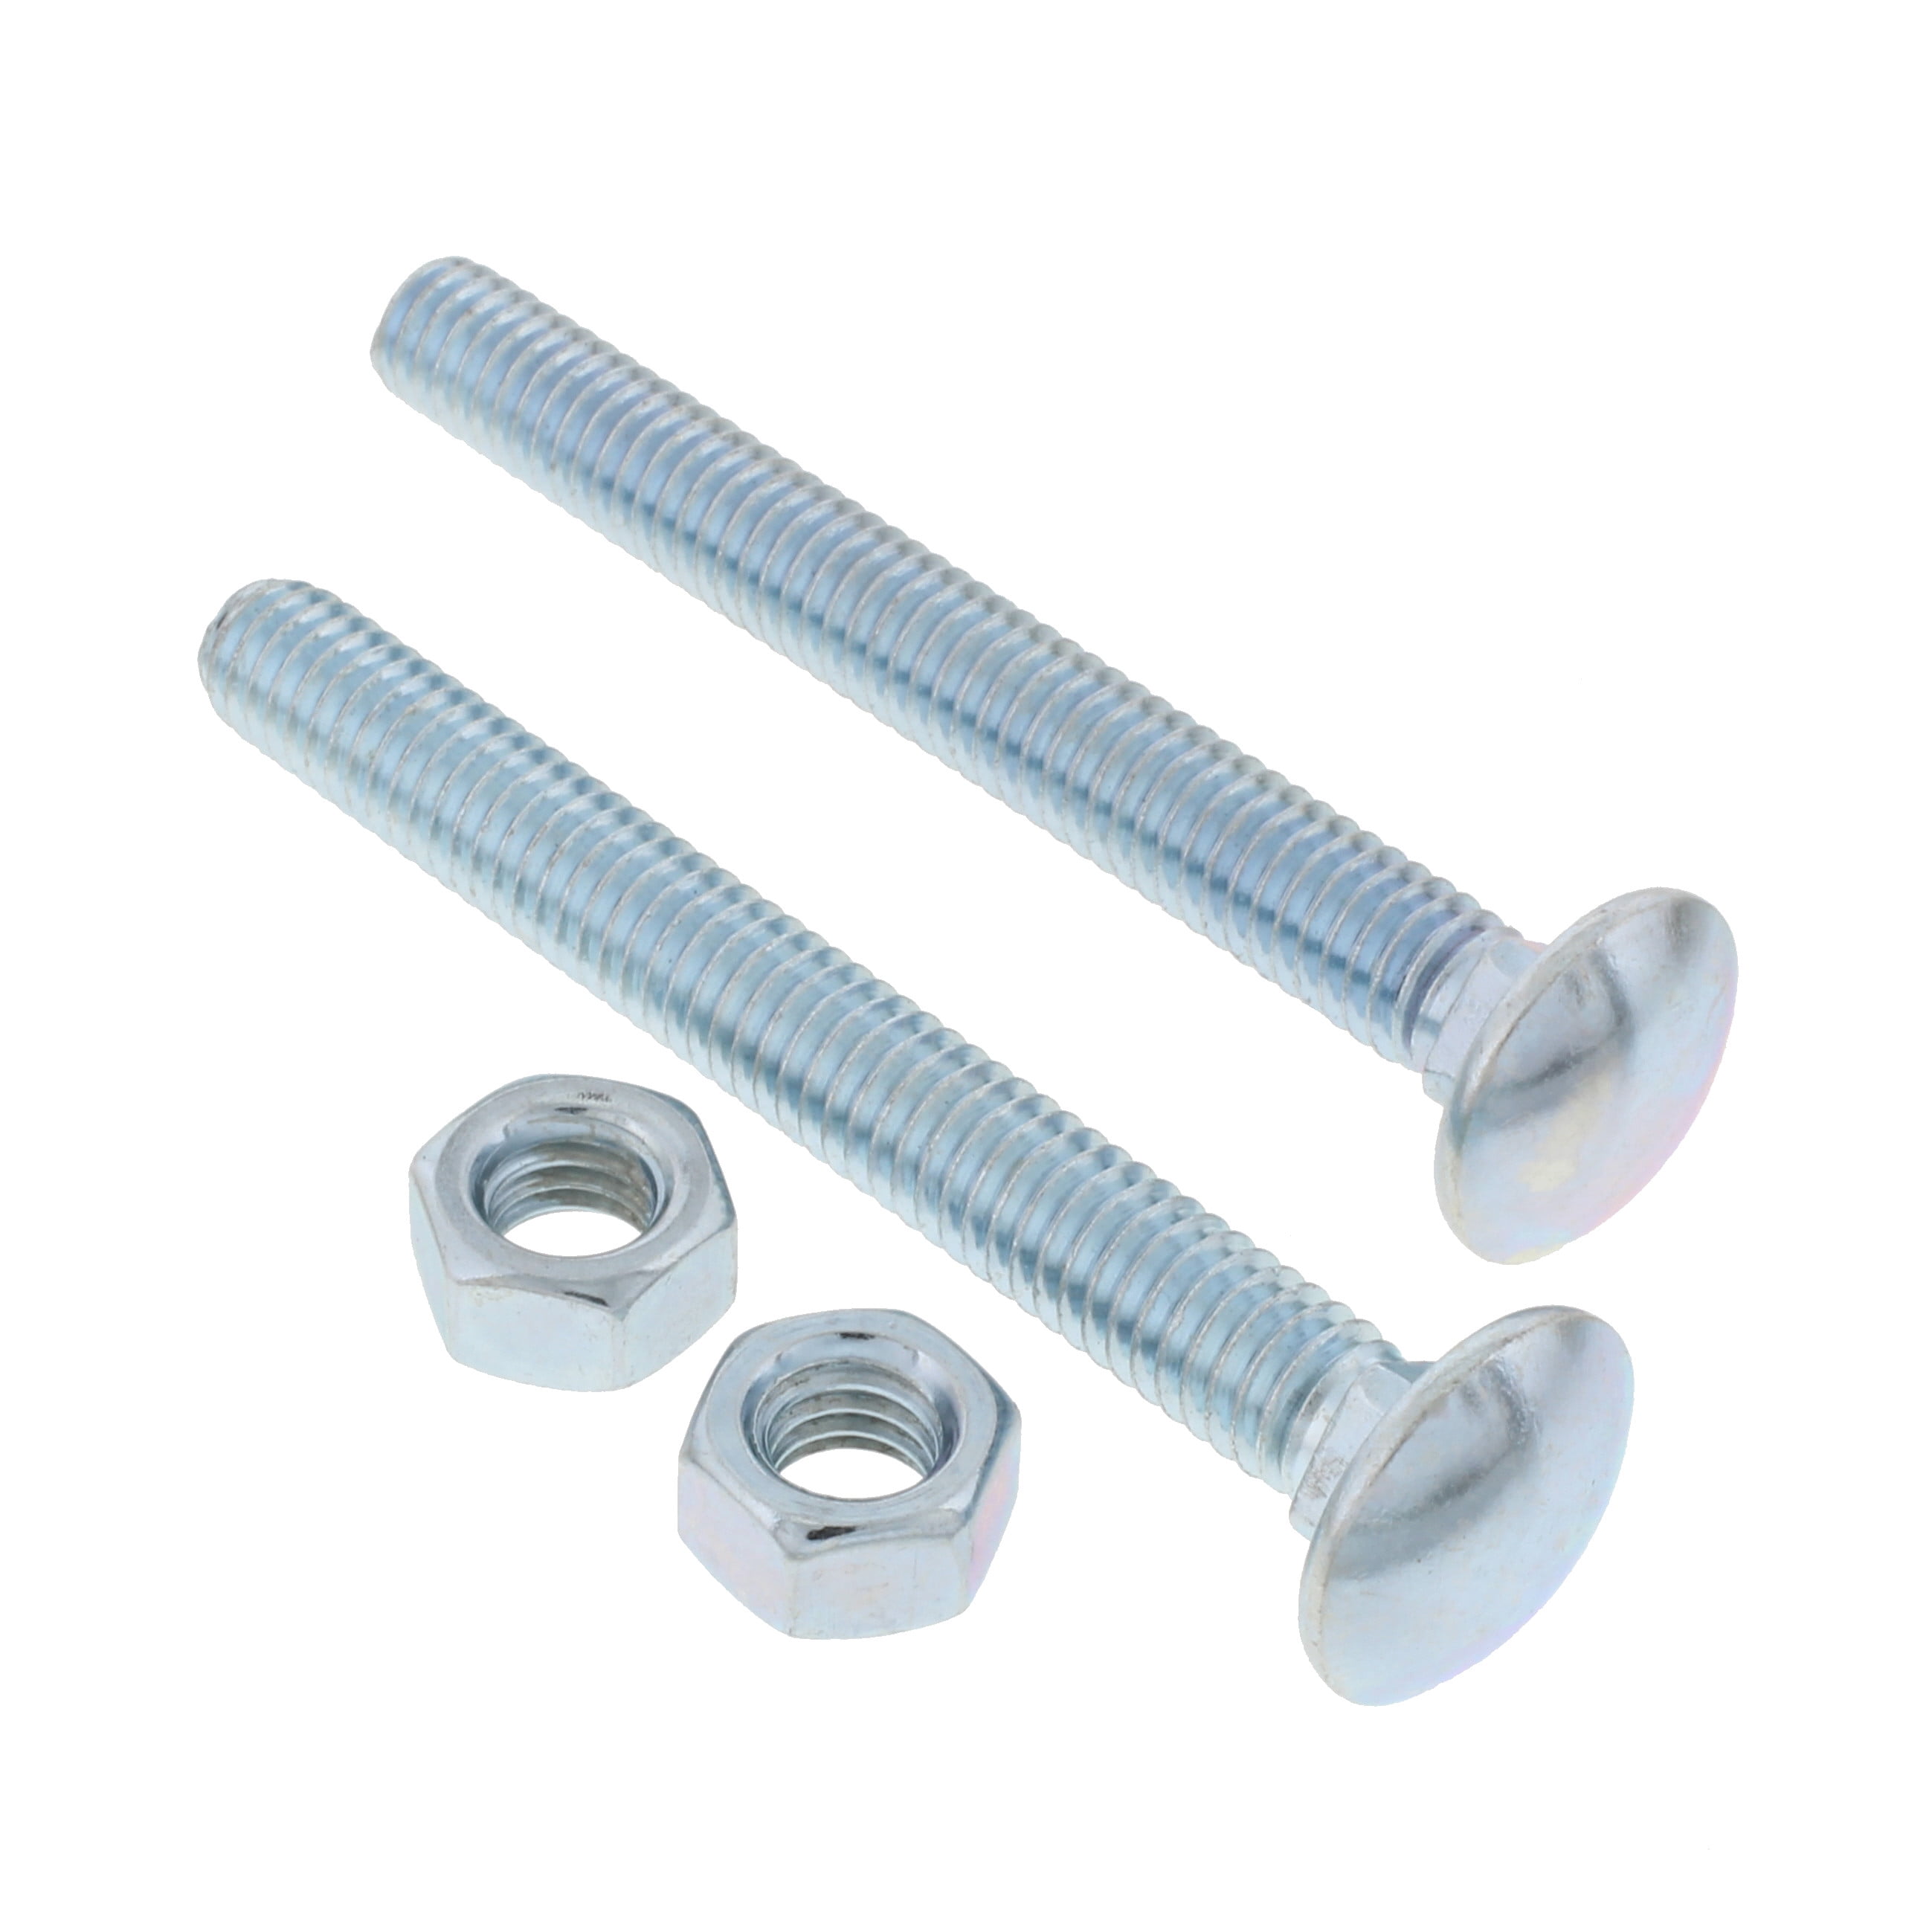 washers nuts 1/2-13 Carriage bolts zinc plated steel from 1-14 inches 100 ct, 